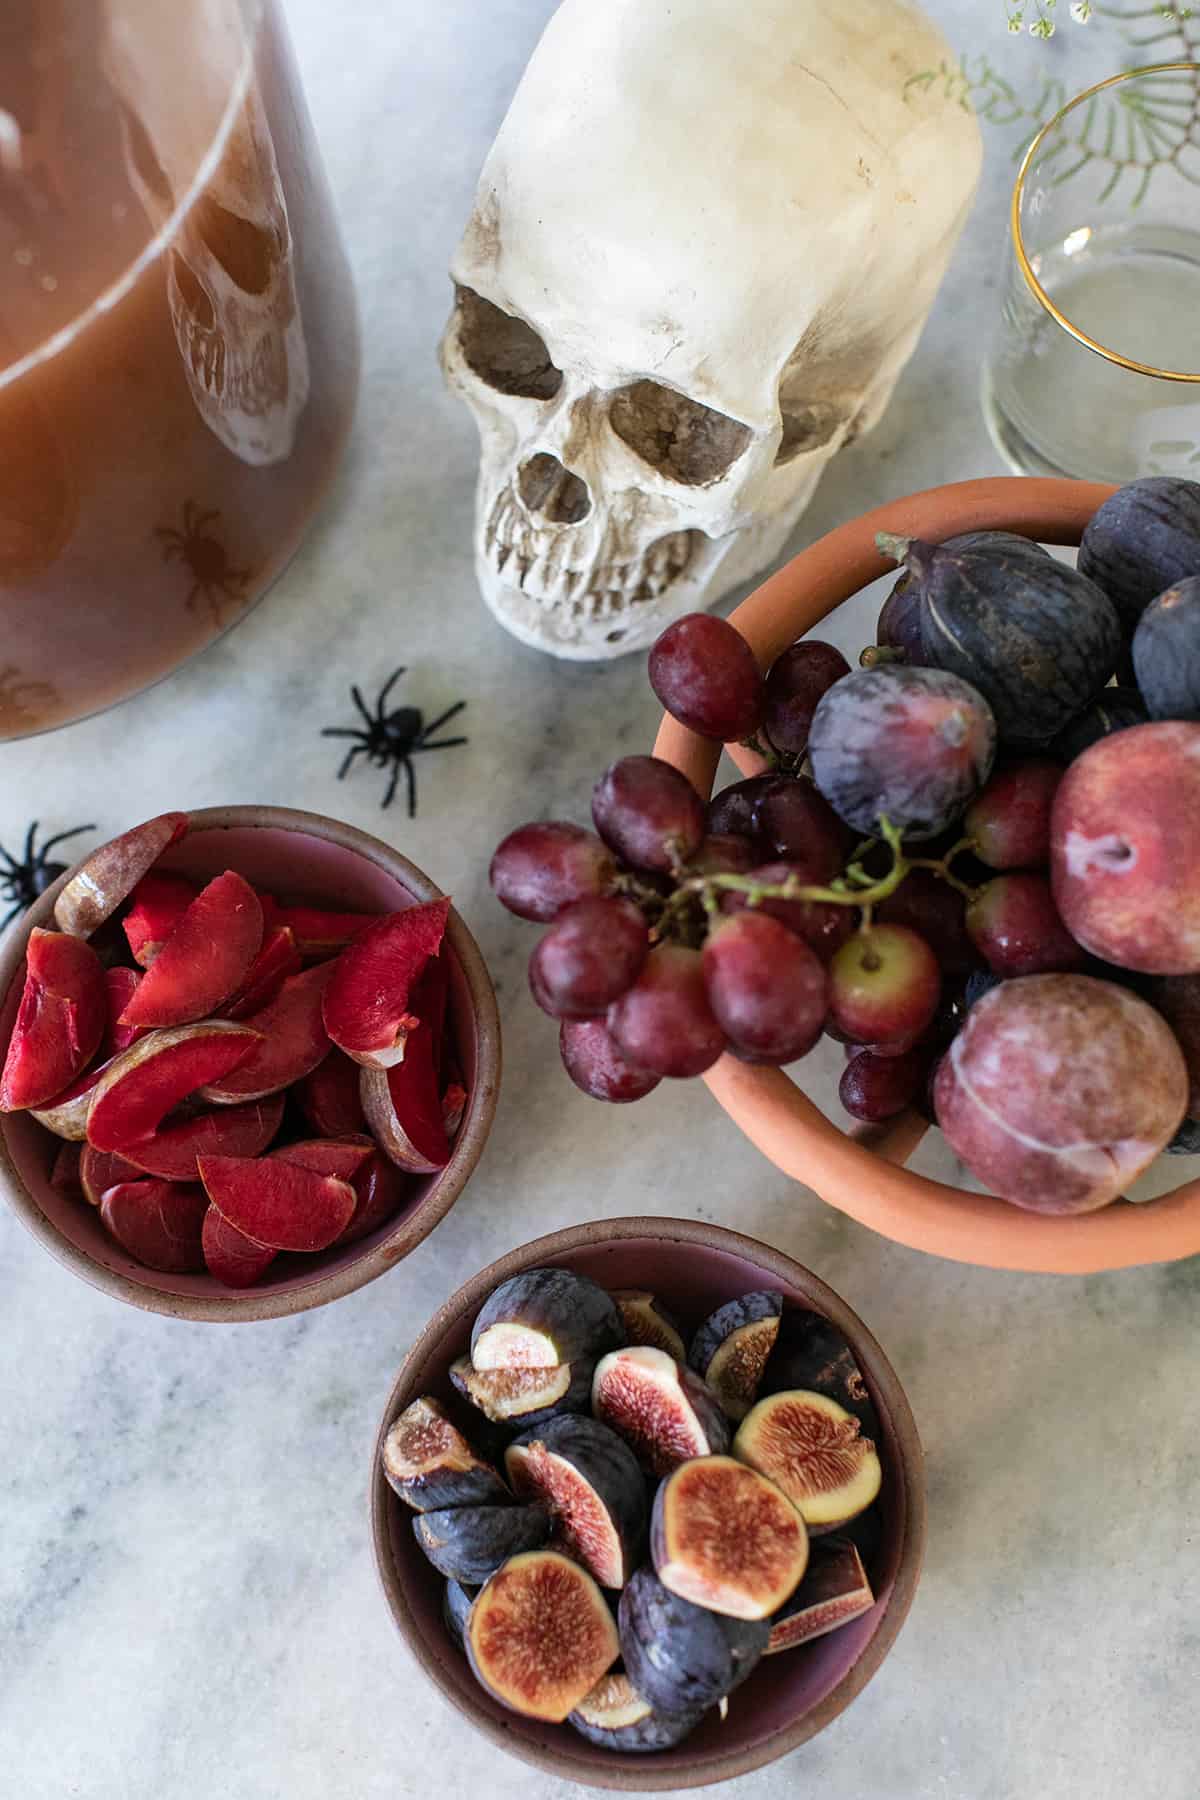 Figs, sliced plums and grapes in bowls with a skeleton.